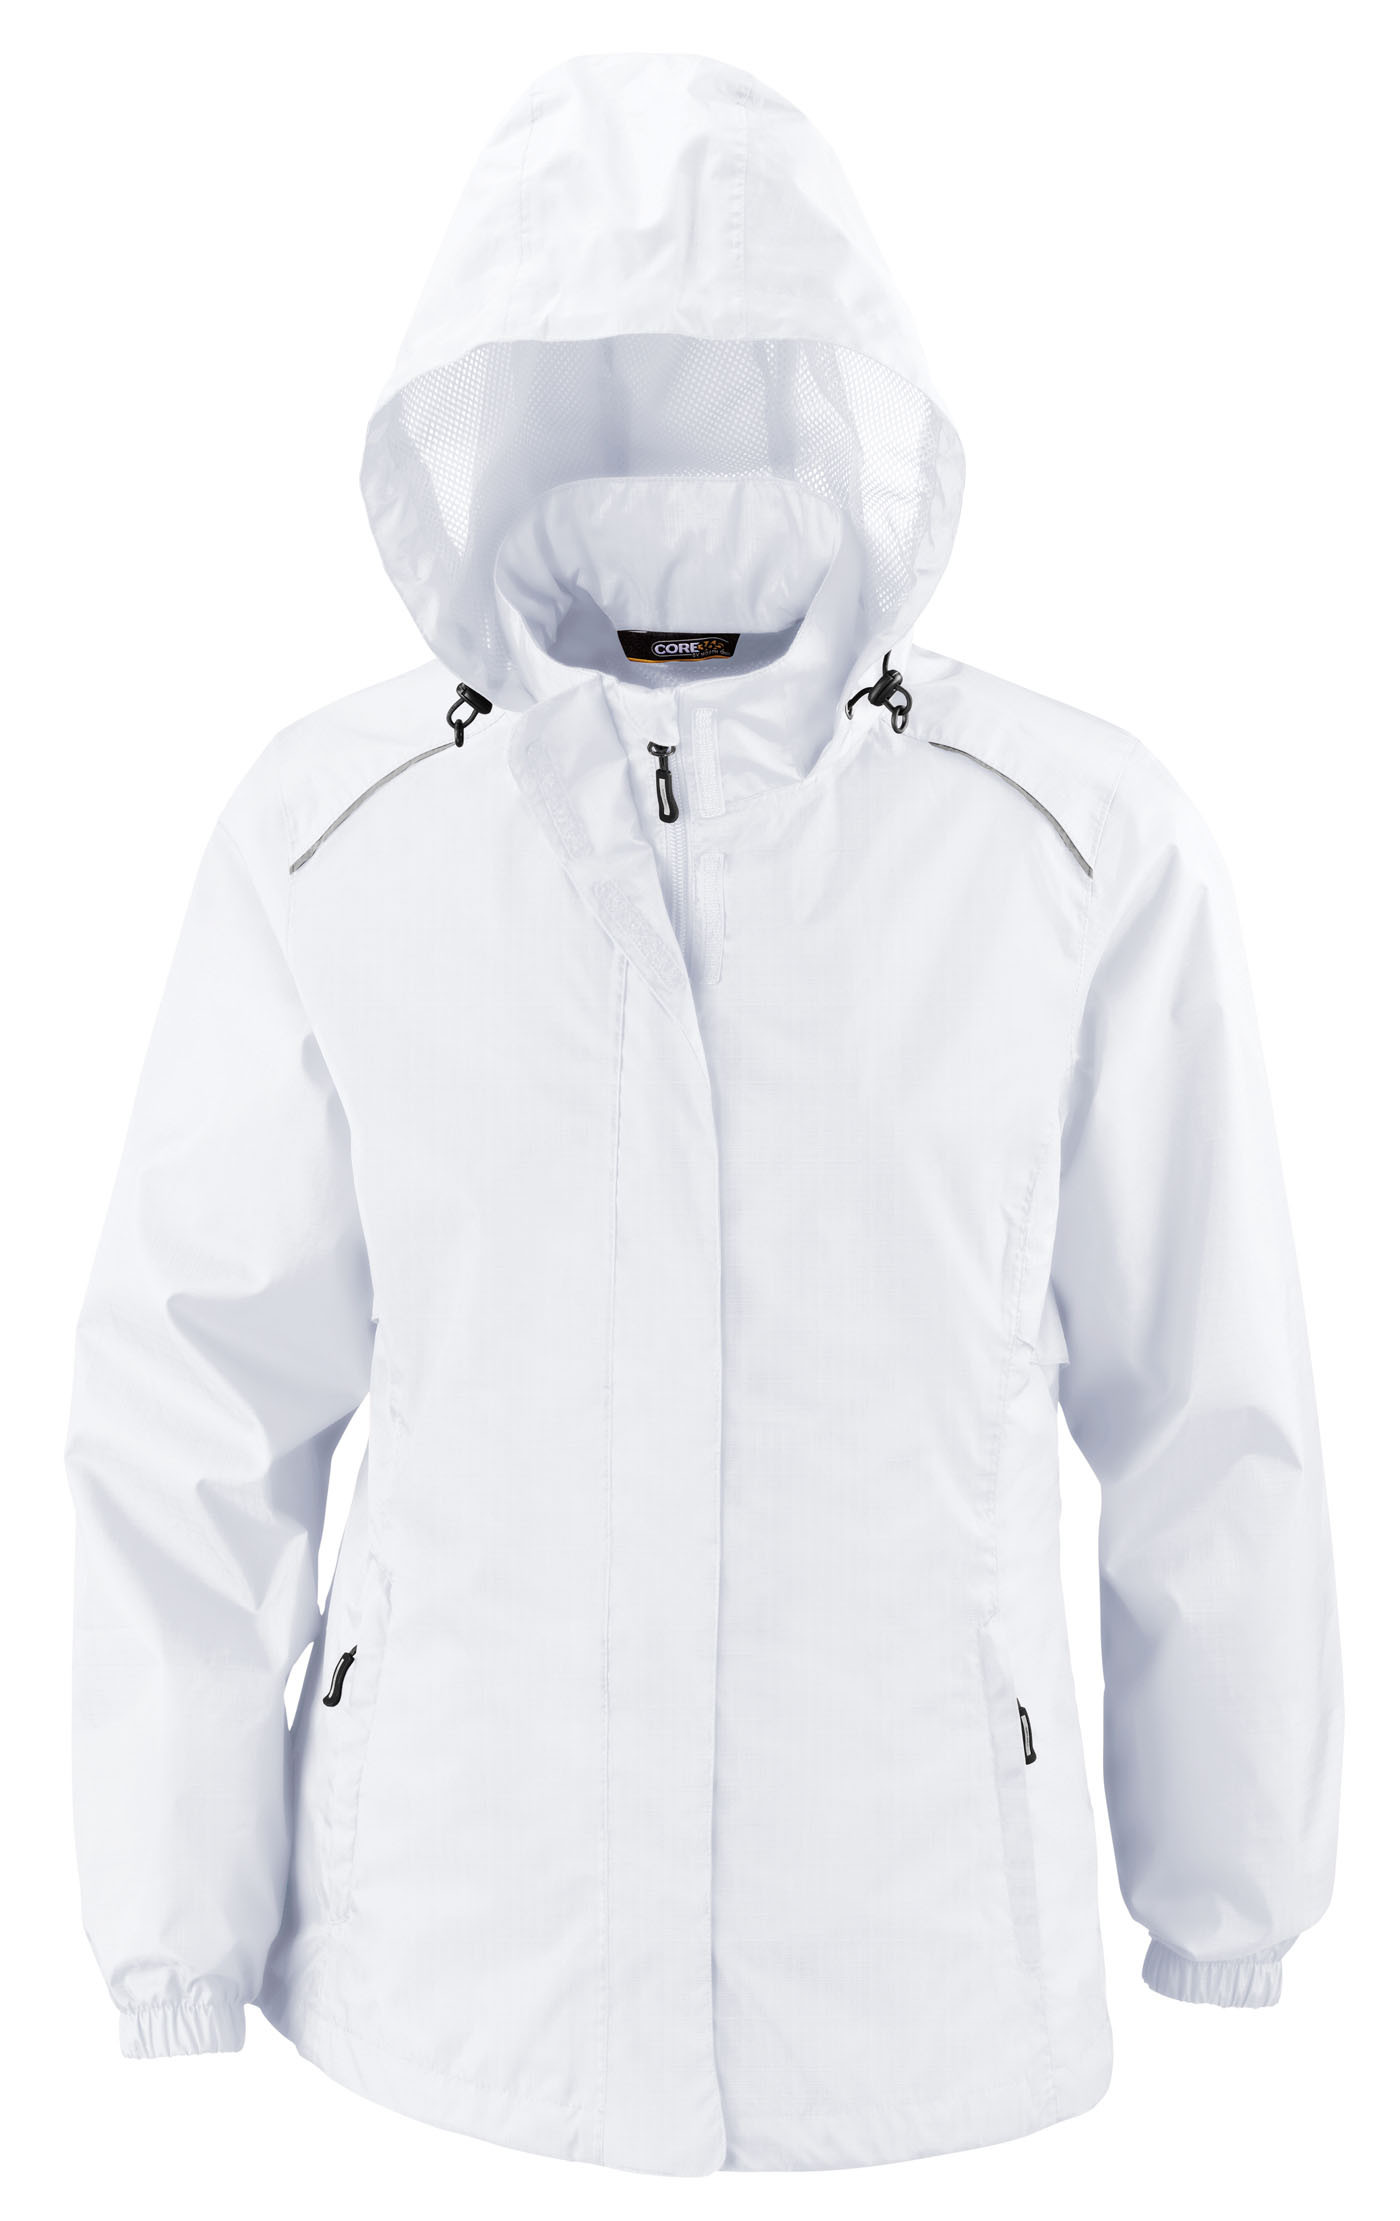 Core 365 78185 - Ladies' Climate Seam-Sealed Lightweight Variegated Ripstop Jacket